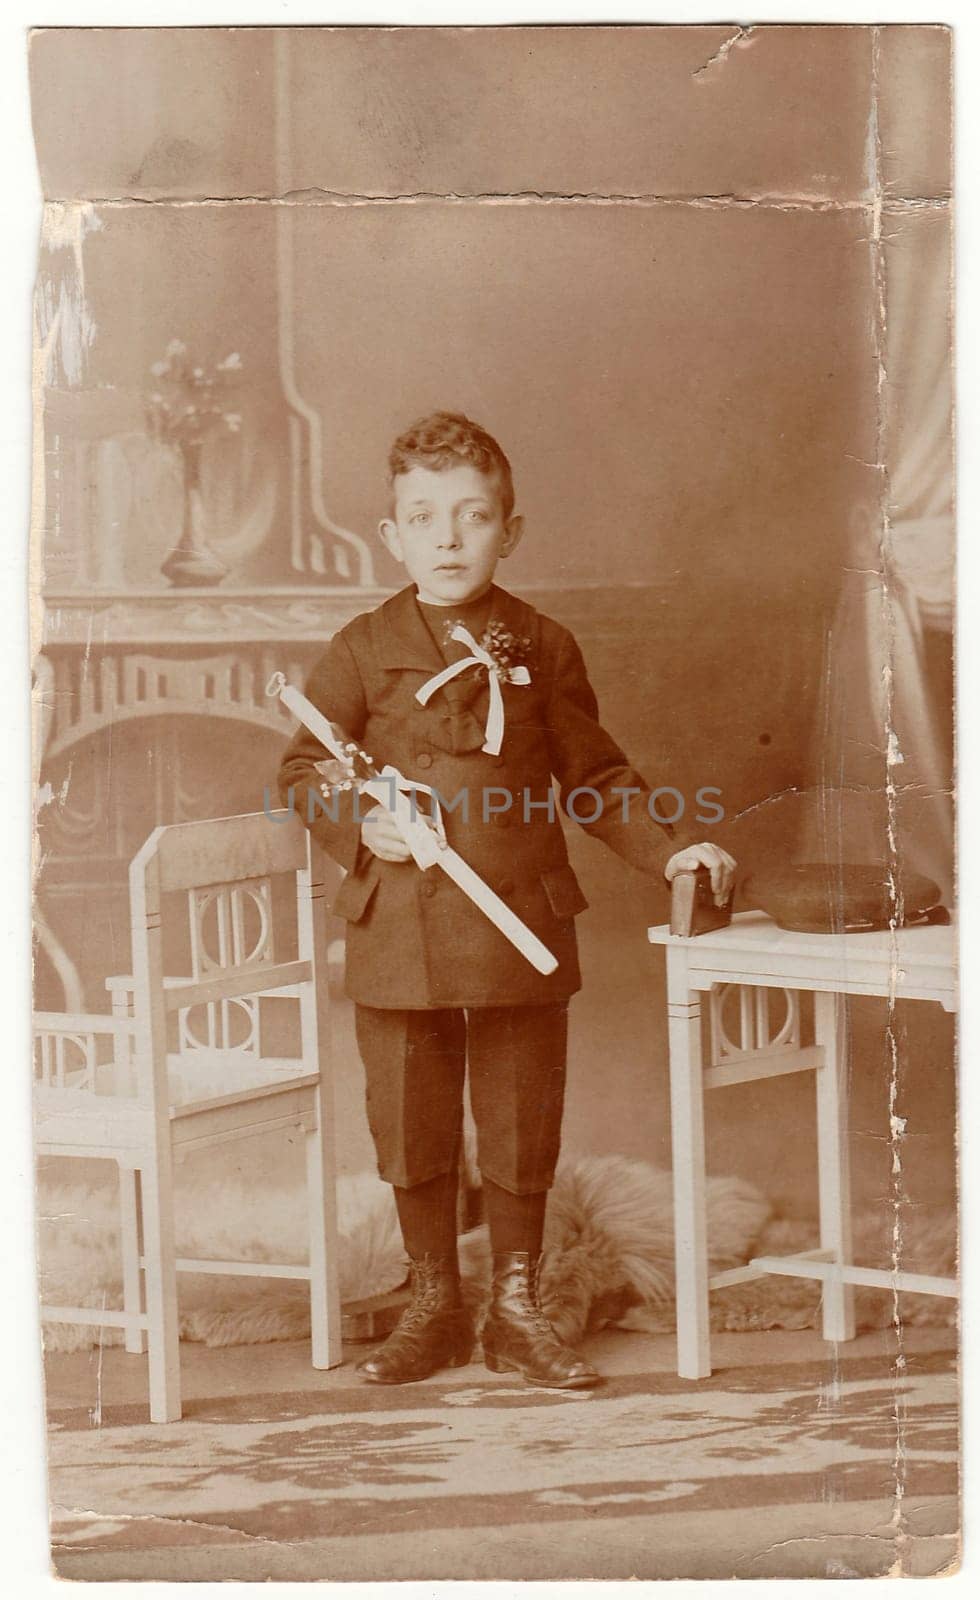 HODONIN, AUSTRIA-HUNGARY - CIRCA 1910s: A vintage photo shows young boy - the first holy communion. Antique black white photo with sepia tint.